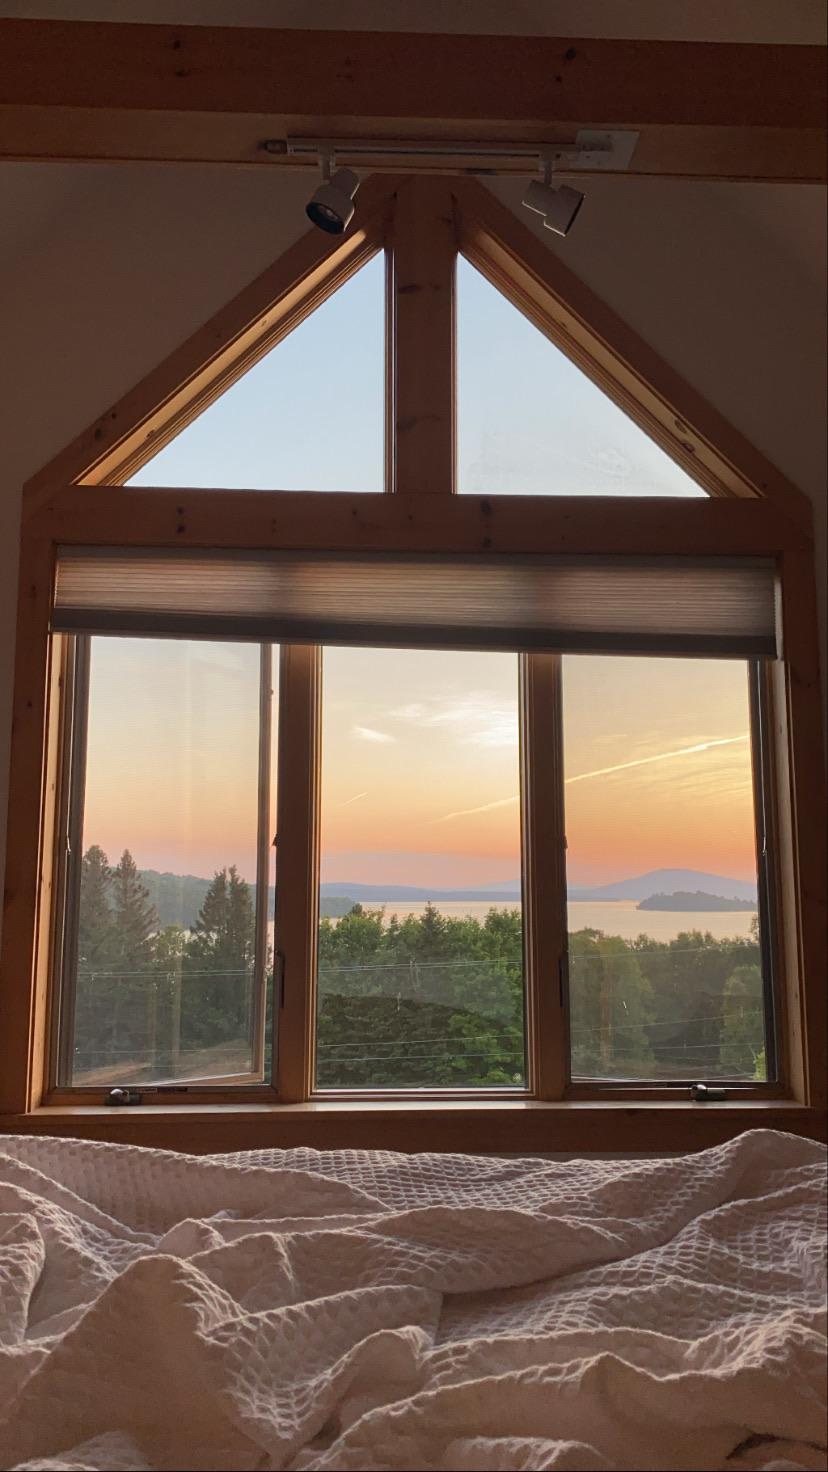 Watching the sunset from bed at a cabin I stayed at in Maine